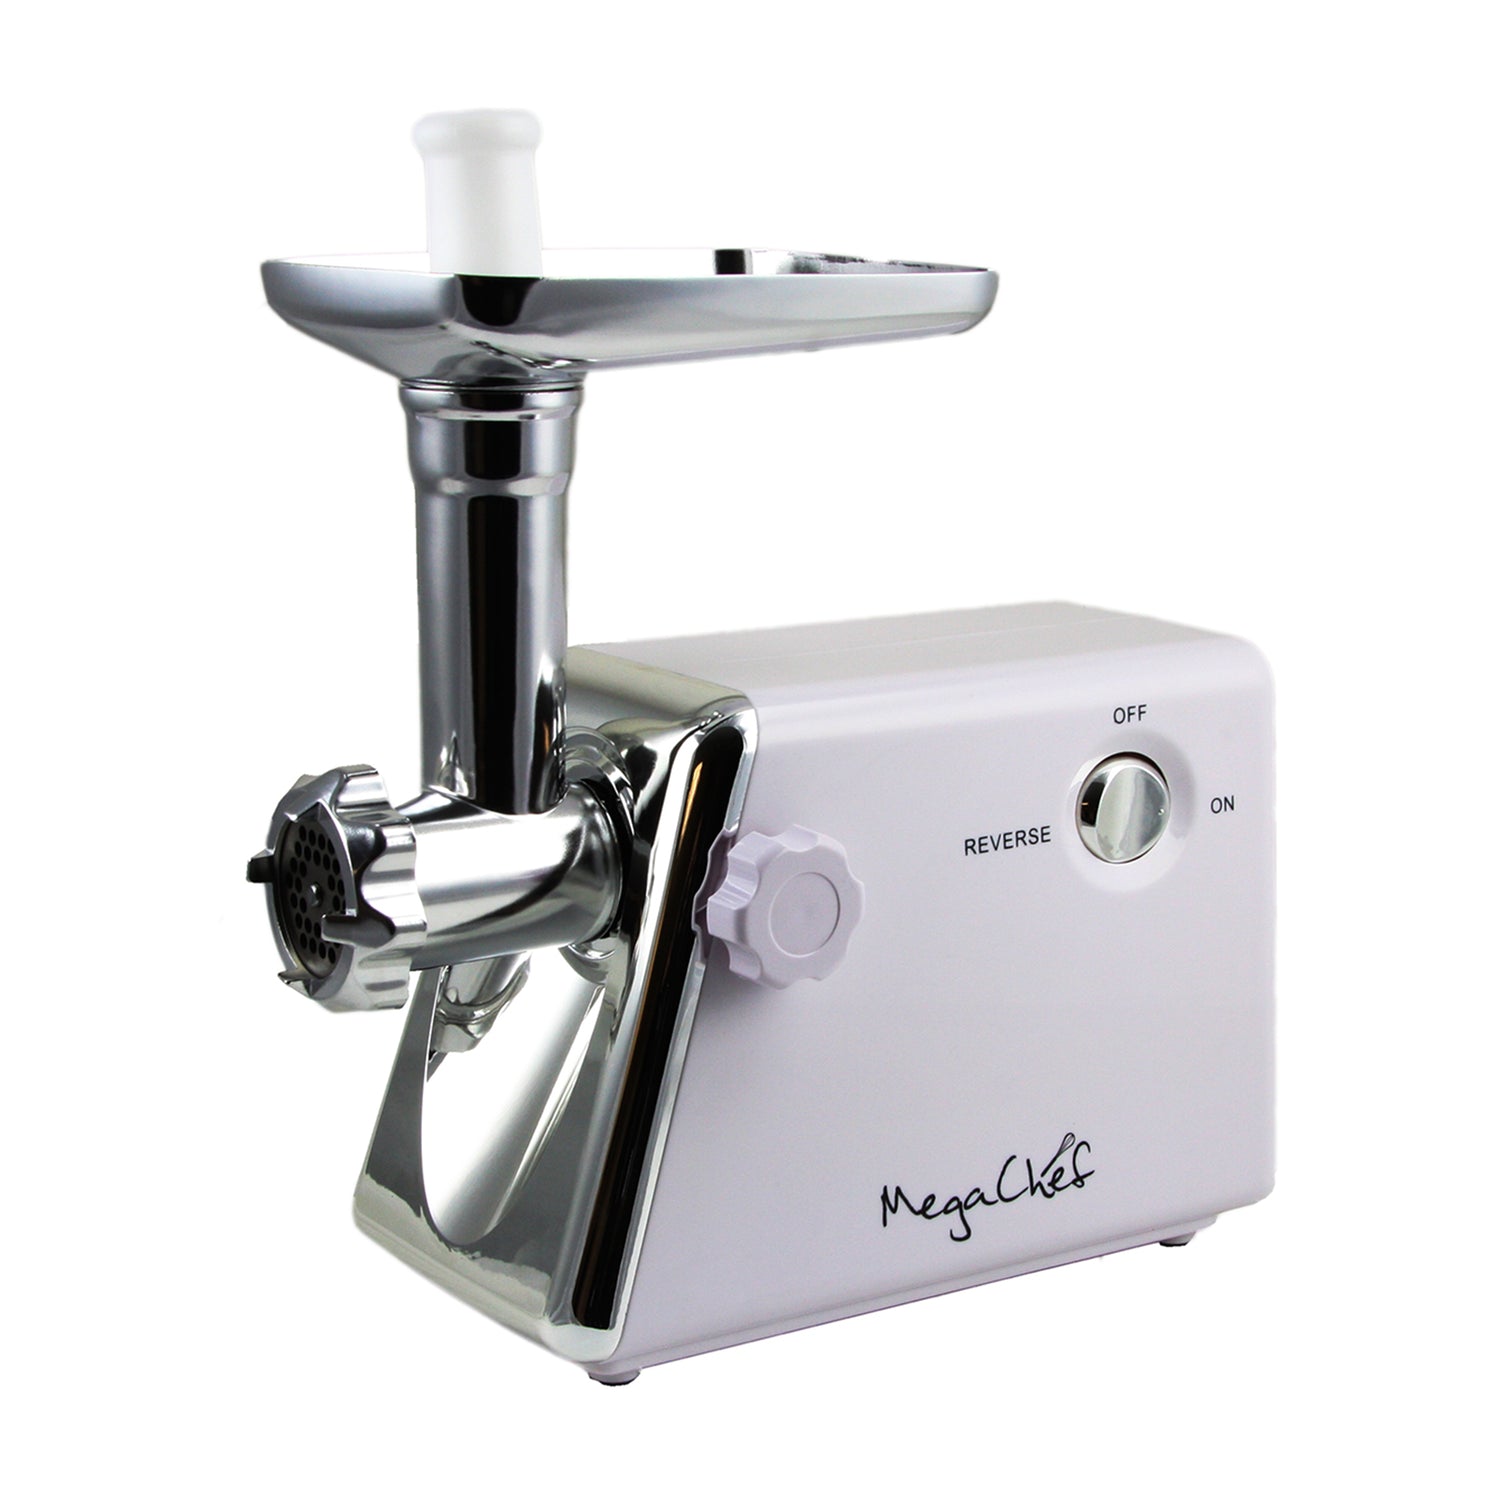 MEGACHEF MegaChef 1200 Watt Ultra Powerful Automatic Meat Grinder for Household Use